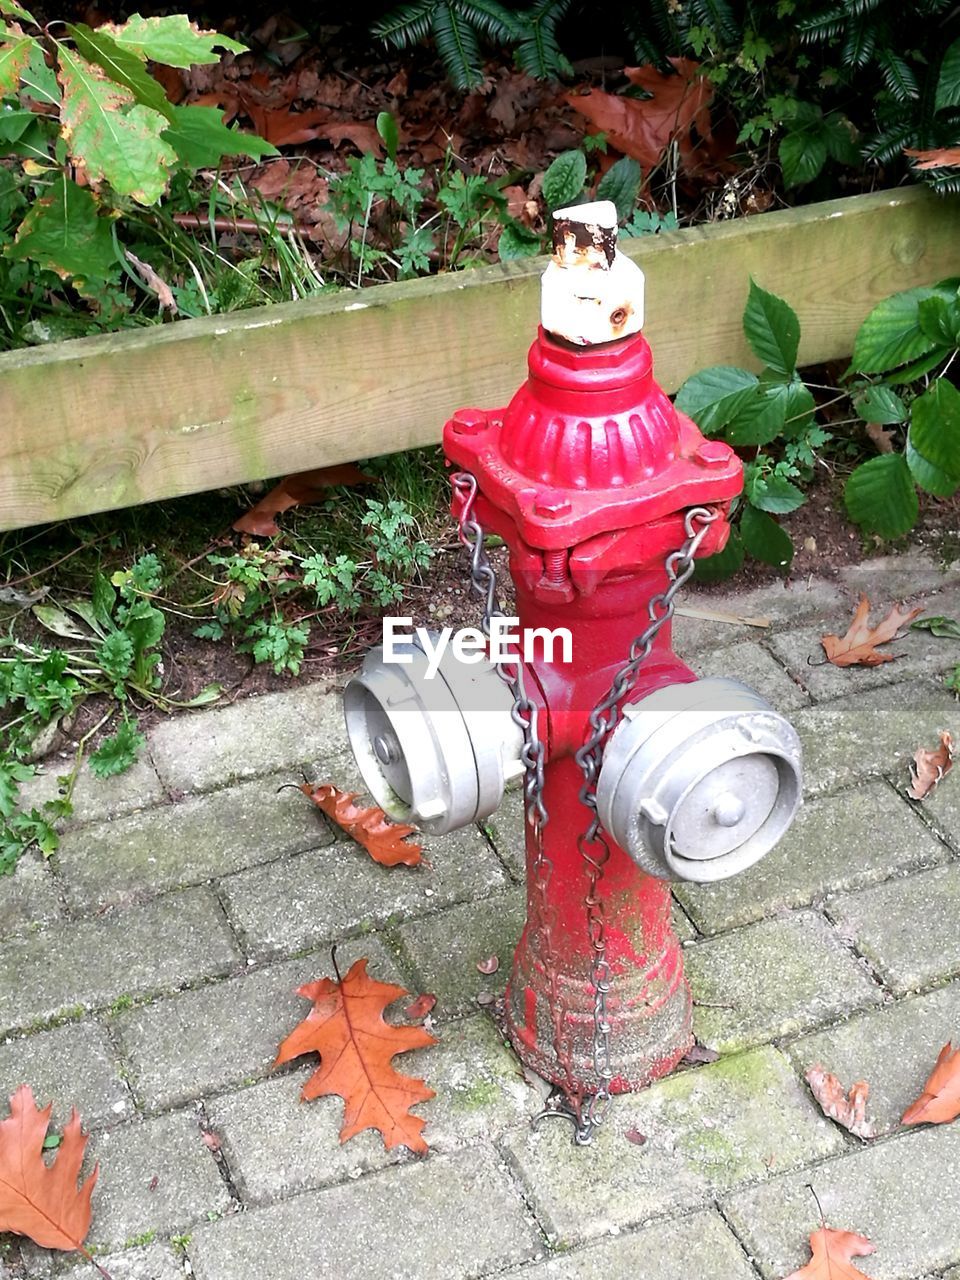 HIGH ANGLE VIEW OF RED FIRE HYDRANT